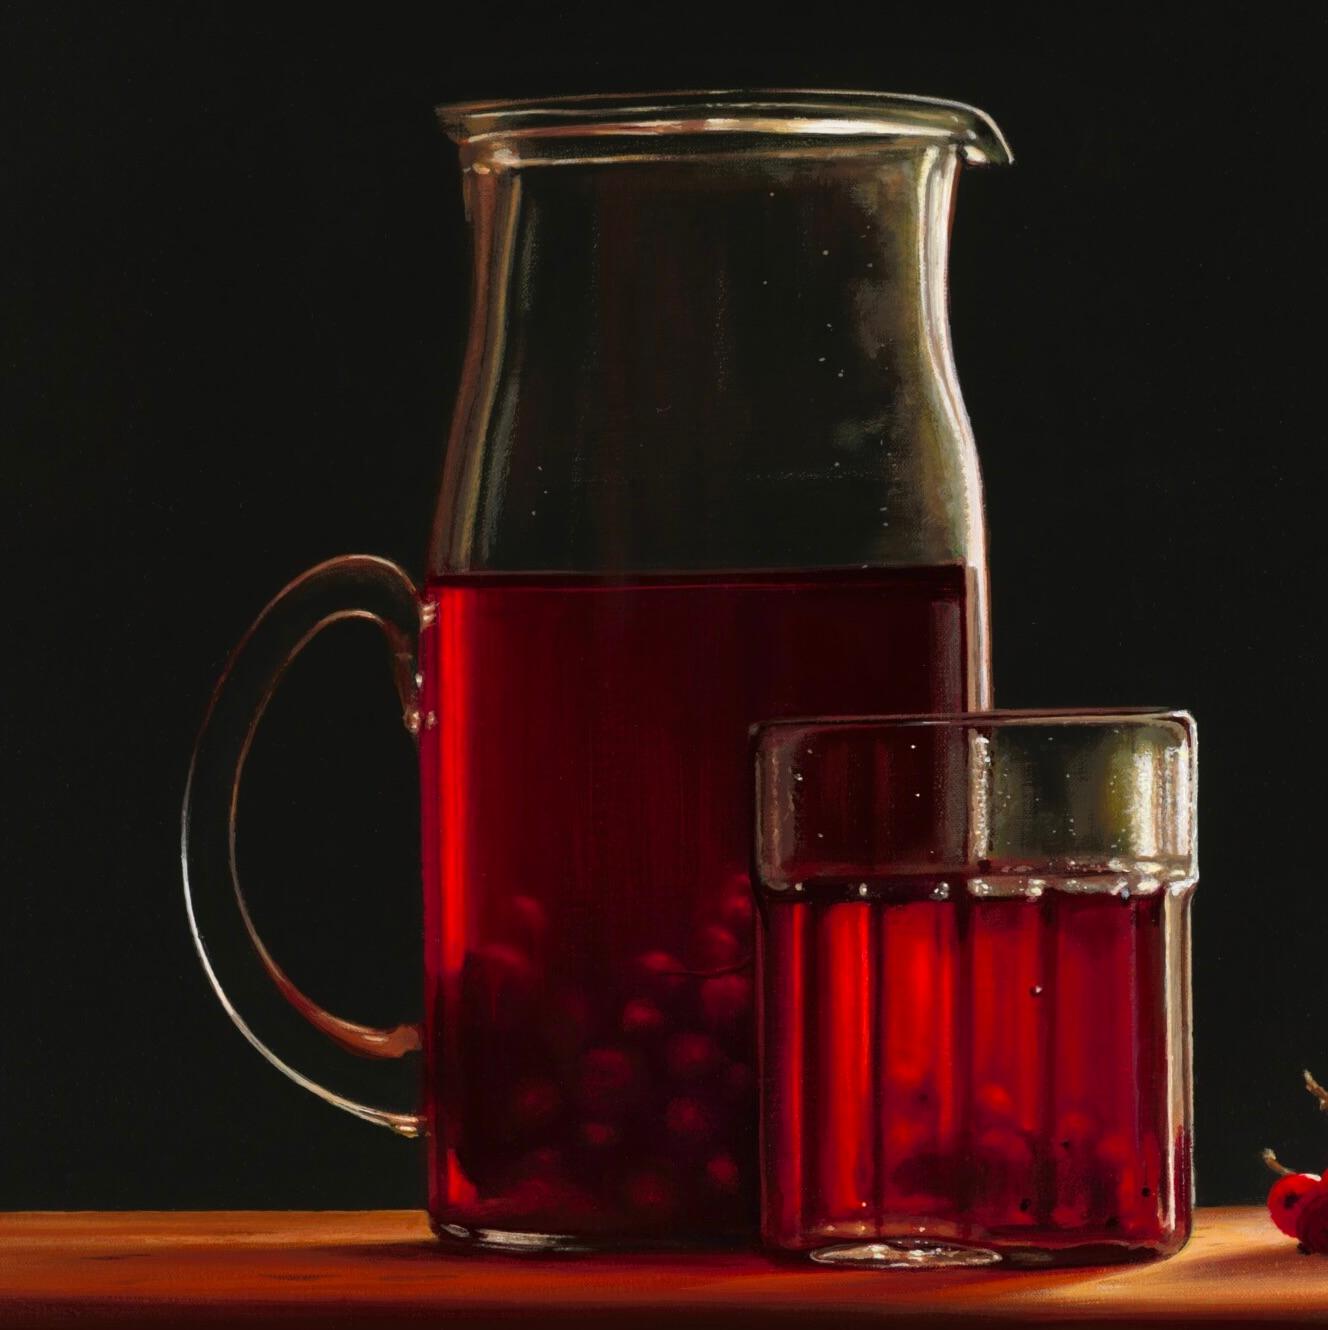 Berry juice with ribbed glass - 21st Century Dutch Still-life painting 4